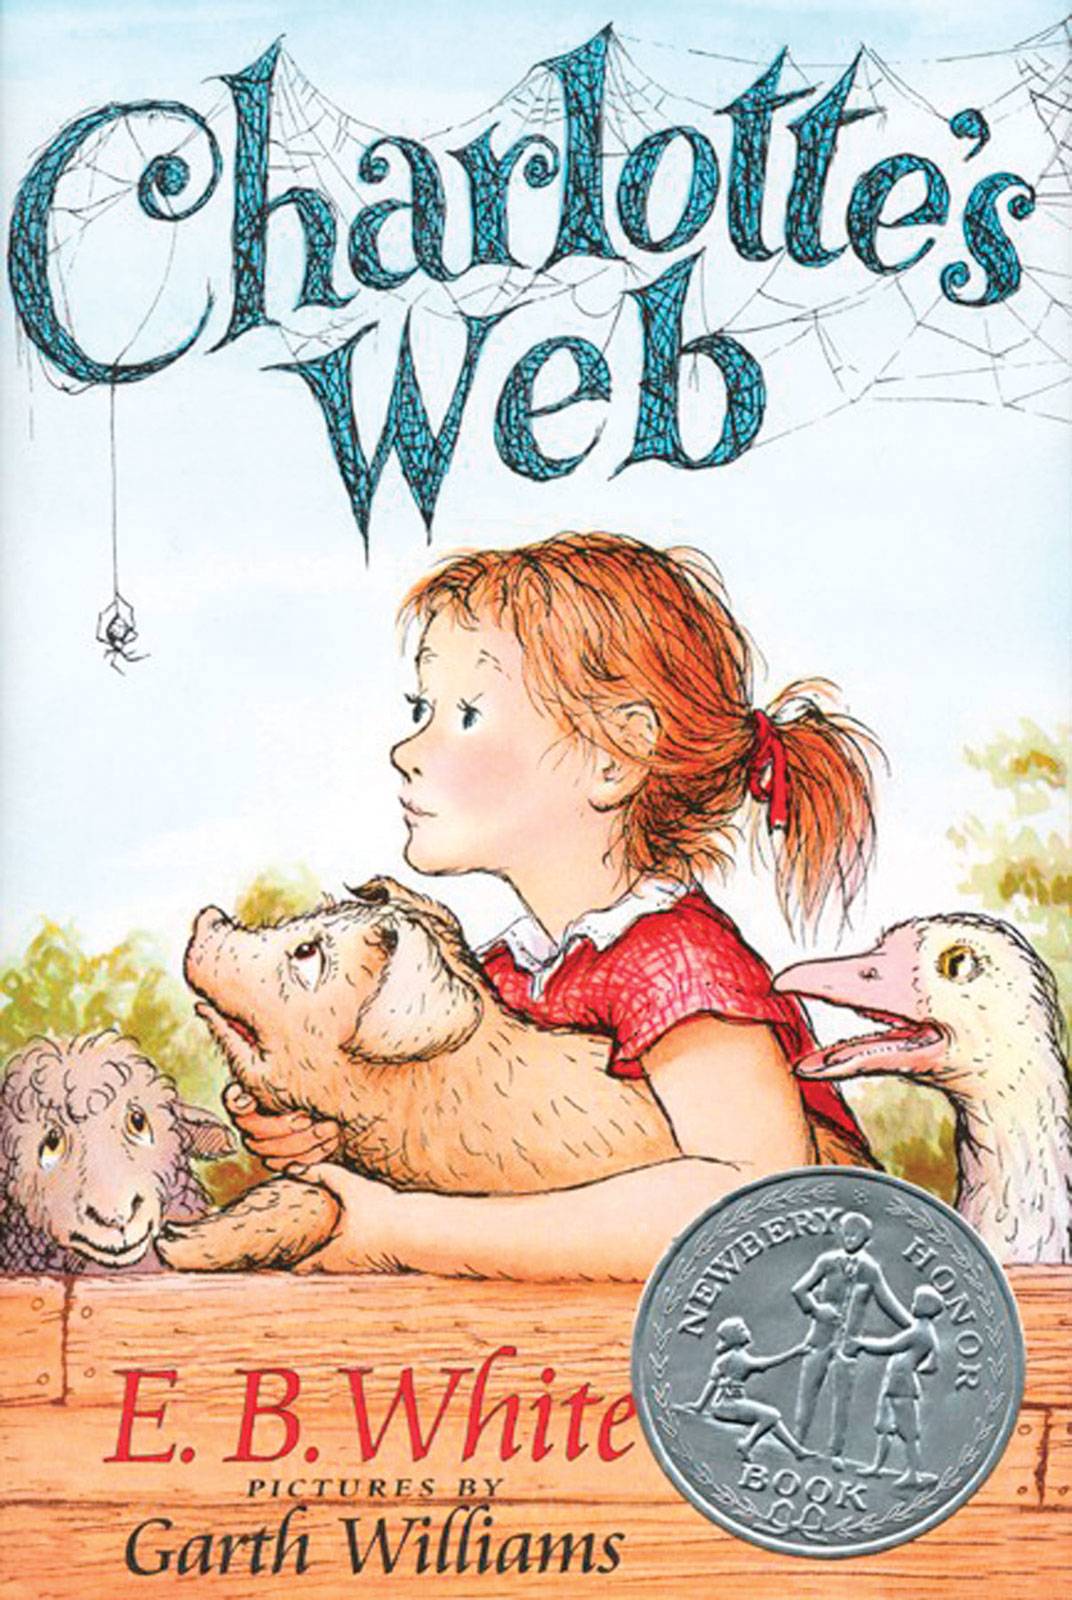 <p>The story born on a farm about an intelligent spider who stunned the world with her silken messages is a must-read for kids.</p> <p>The topics covered include love, family, loss, sacrifice, and empathy, wrapped up in a brilliantly illustrated tale about a girl, a spider, and <i>some pig</i>.</p>